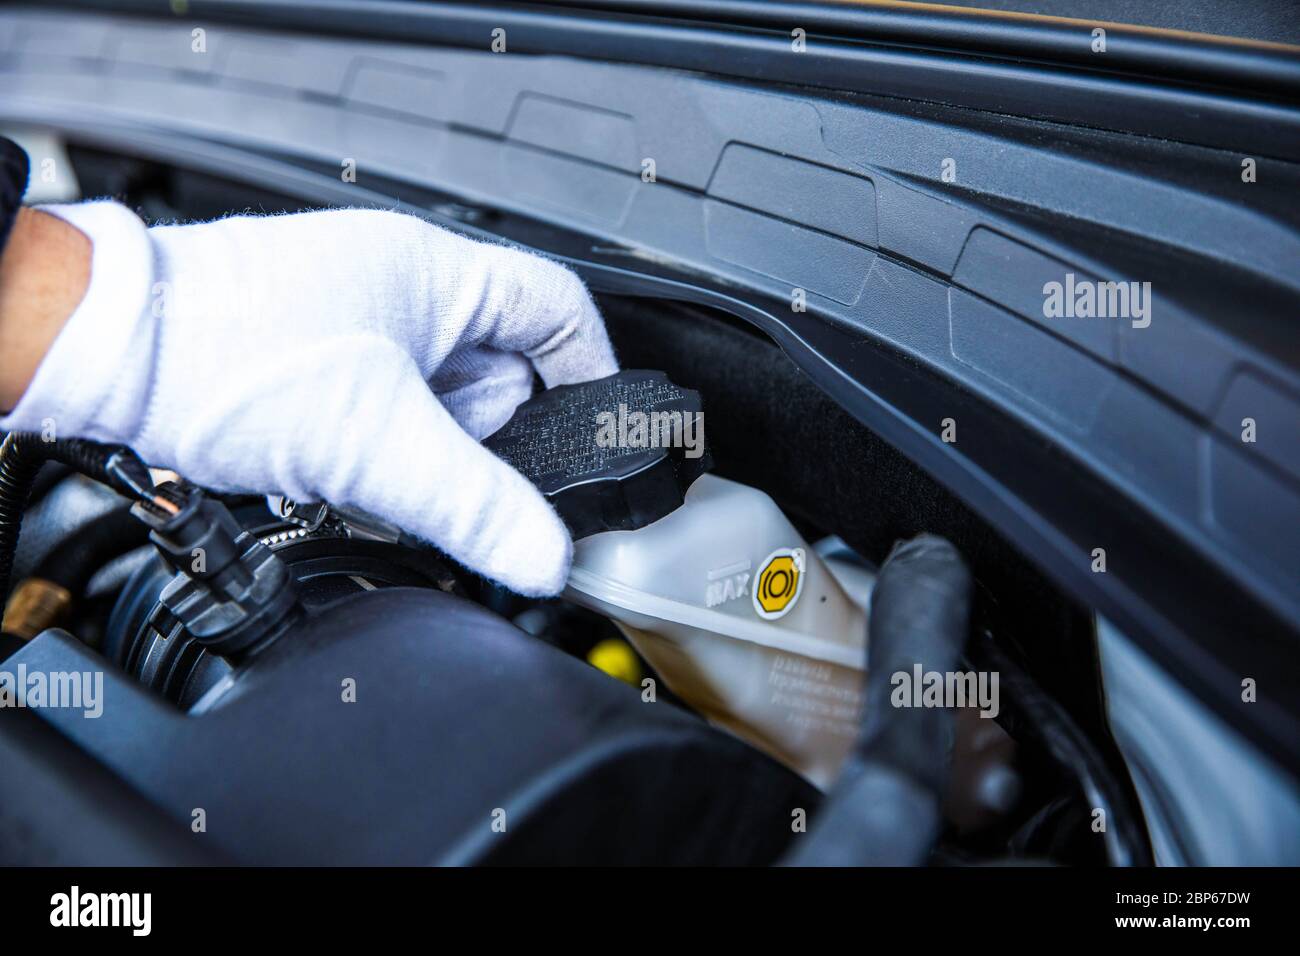 Hand opening a car engine coolant reservoir. Stock Photo